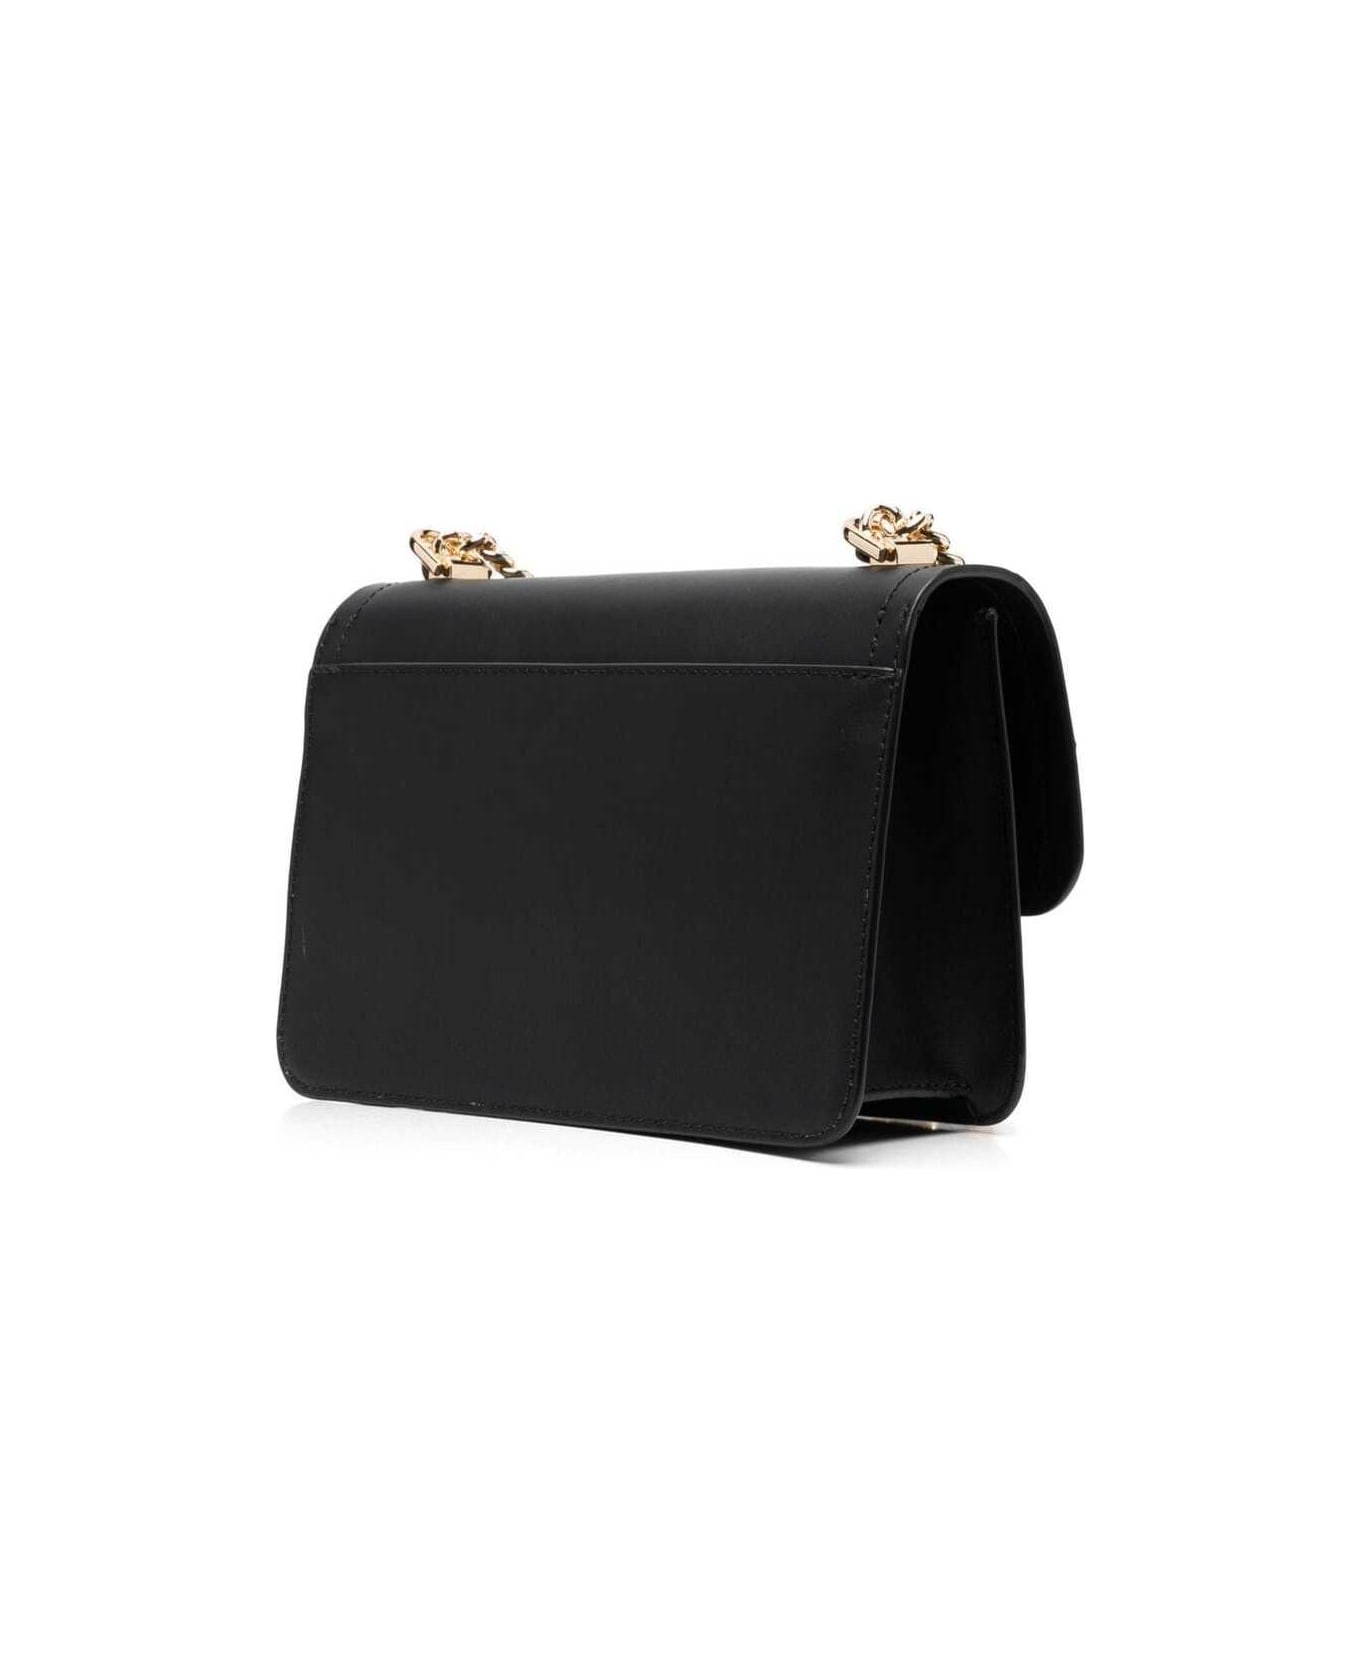 MICHAEL Michael Kors 'heather' Black Shoulder Bag With Mk Logo In Smooth Leather Woman - Black